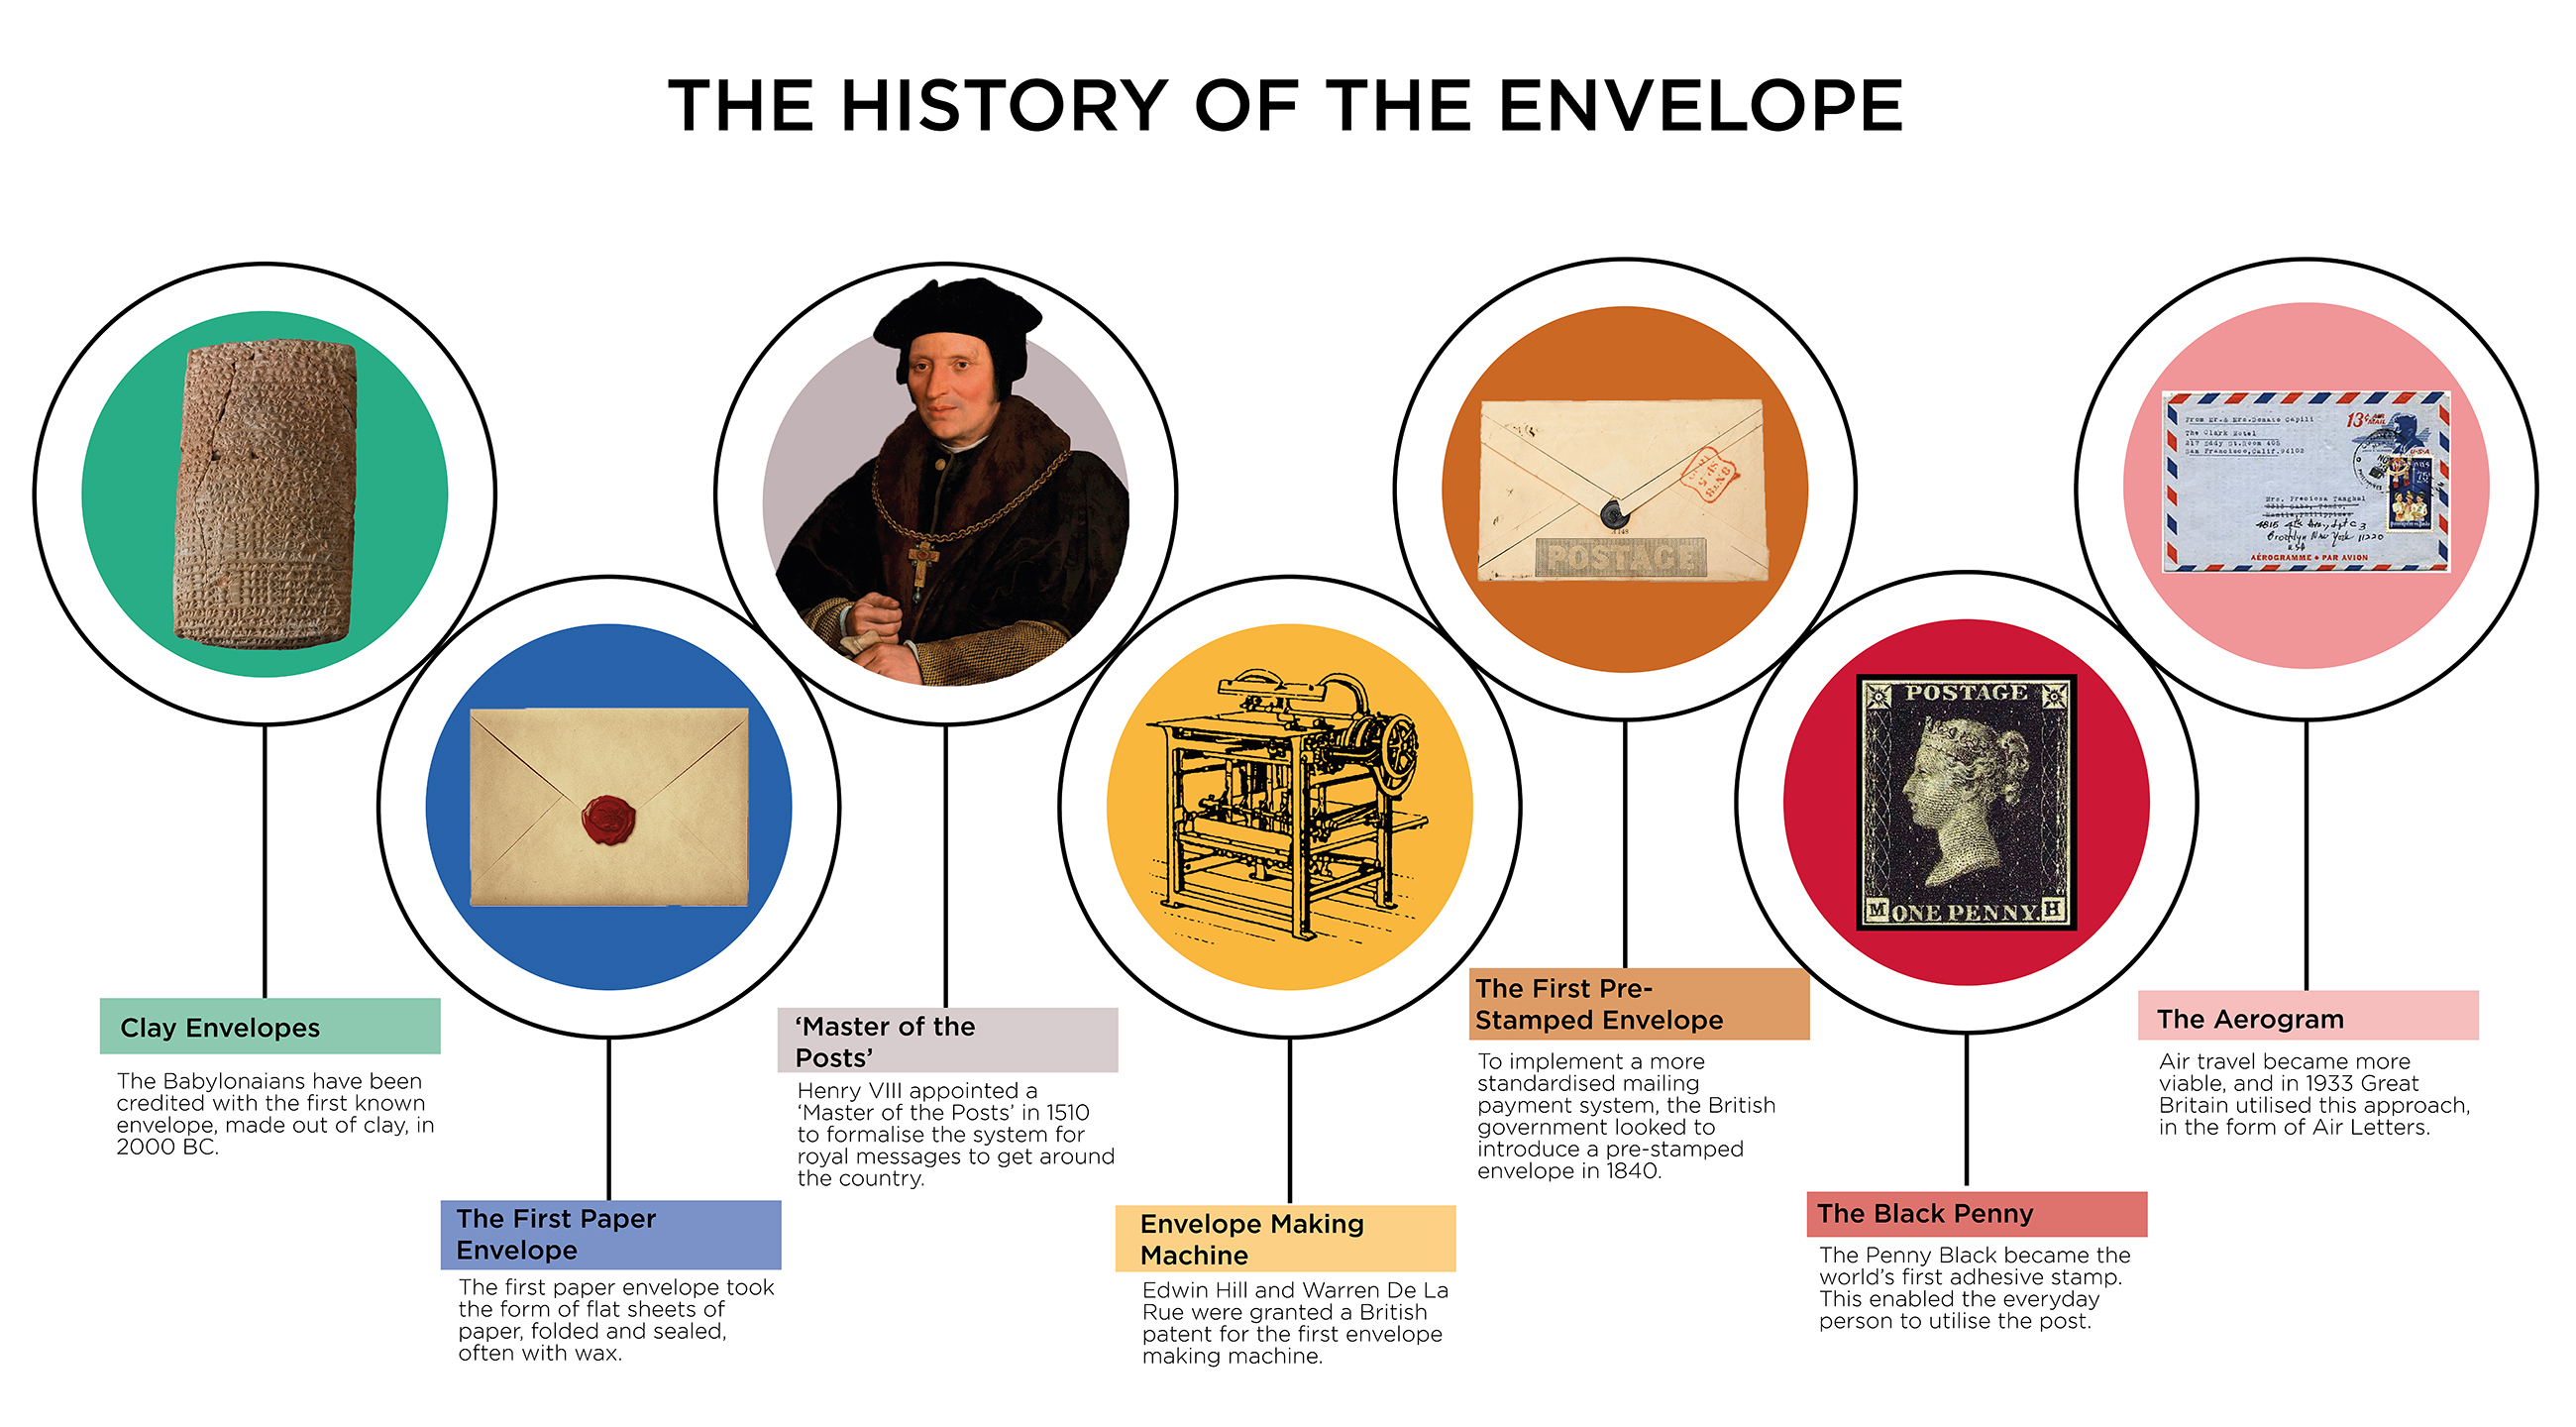 The History of the Envelope Timeline